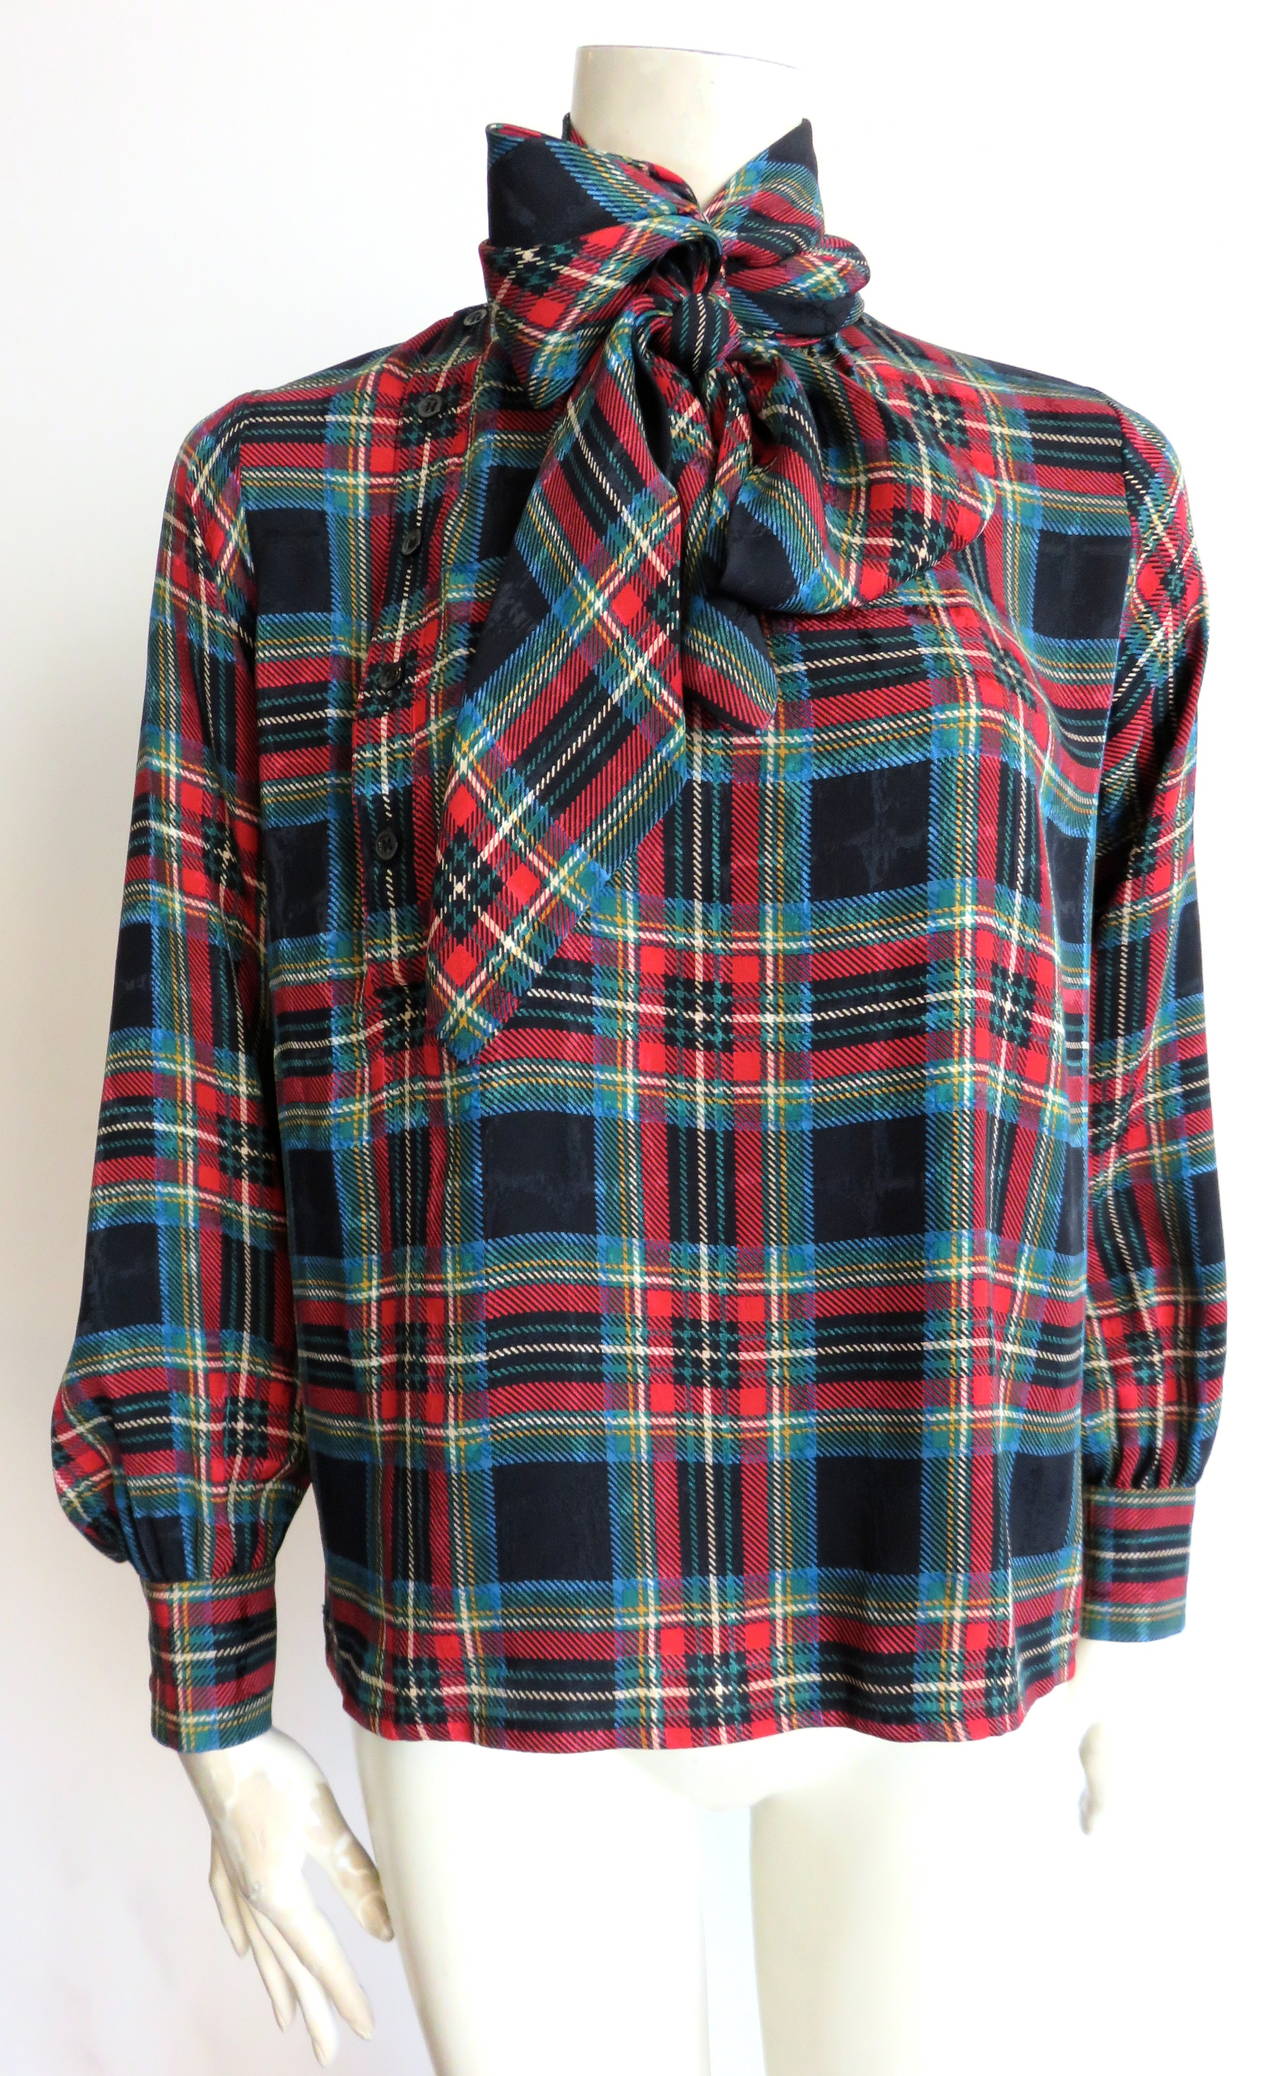 Excellent condition, 1970's, YVES SAINT LAURENT, plaid, silk blouse with 'pussy-cat bow' tie at the front neck.

Button down placket at the wearer's right front.

Loose fit silhouette.

Made in France, as labeled.

In excellent condition